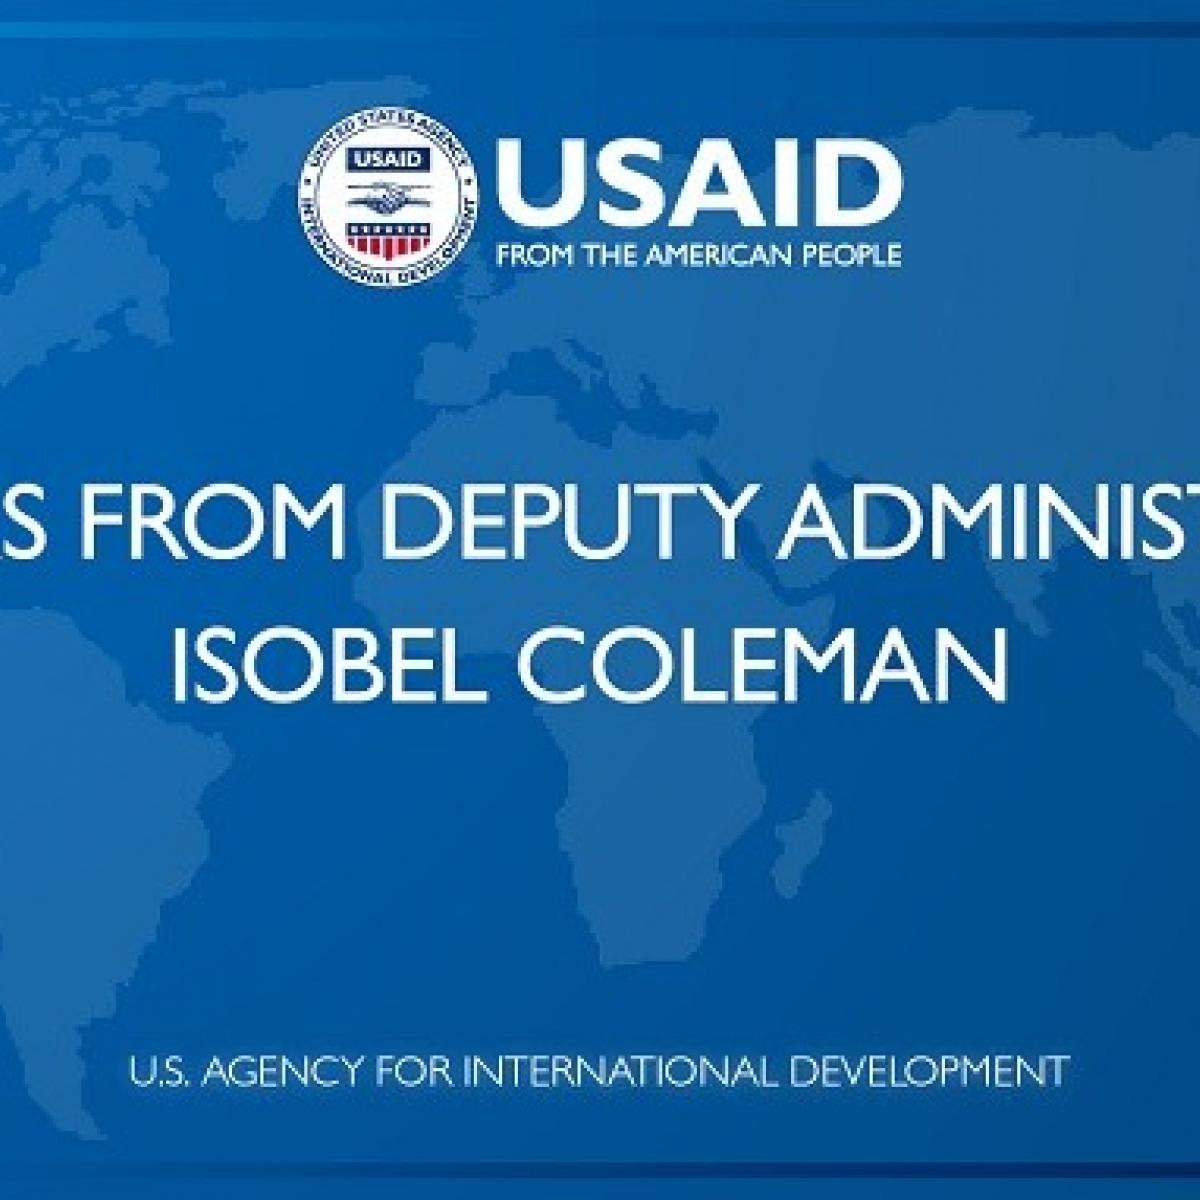 Remarks from Deputy Administrator Isobel Coleman